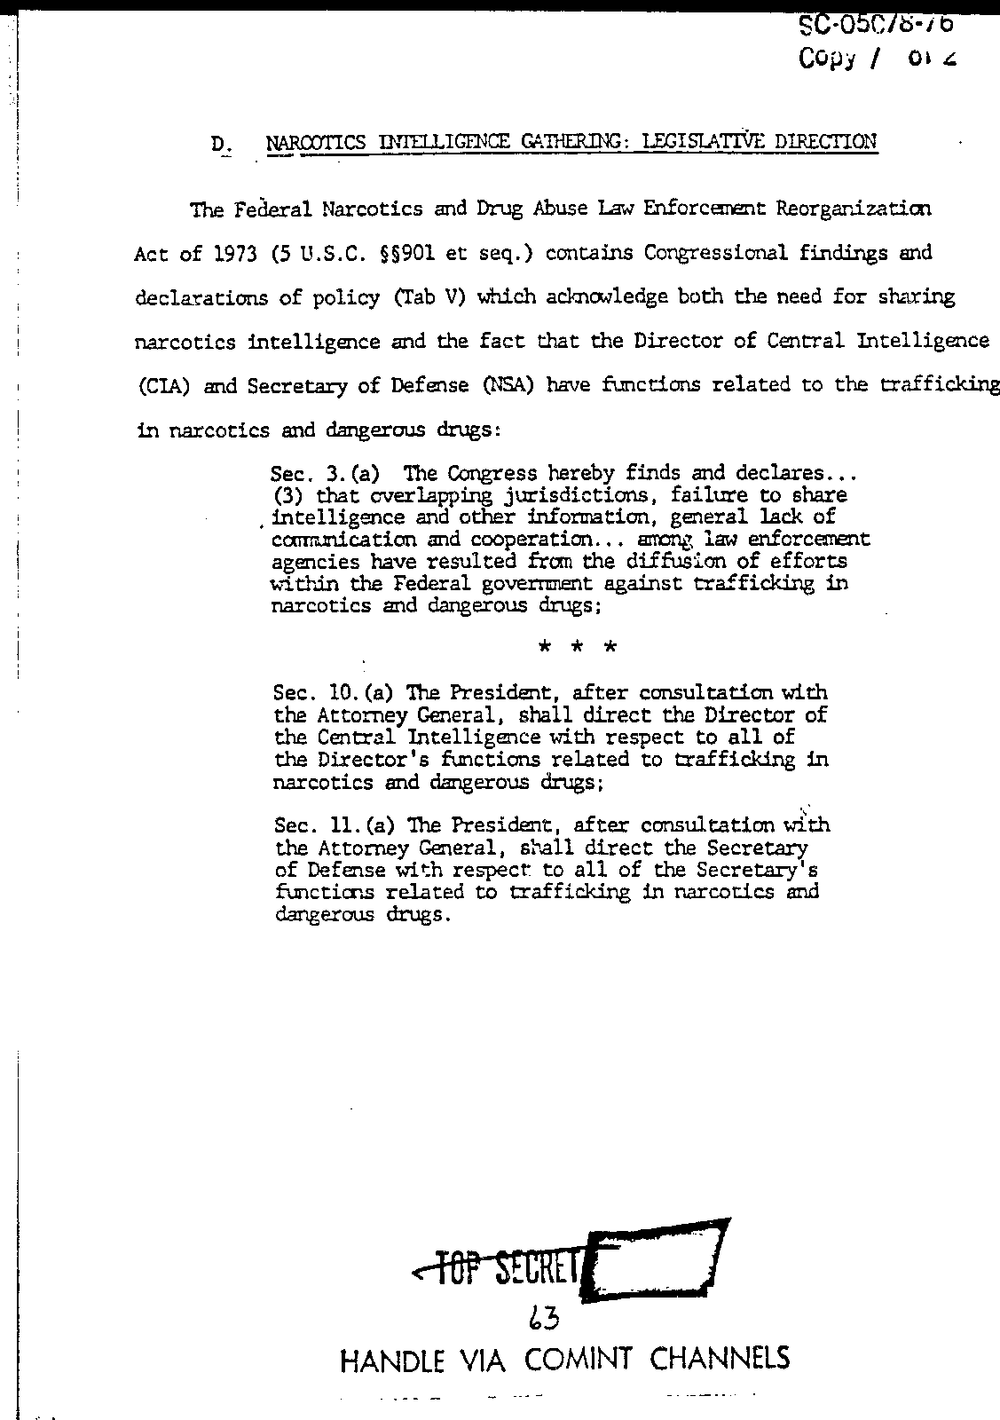 Page 71 from Report on Inquiry Into CIA Related Electronic Surveillance Activities